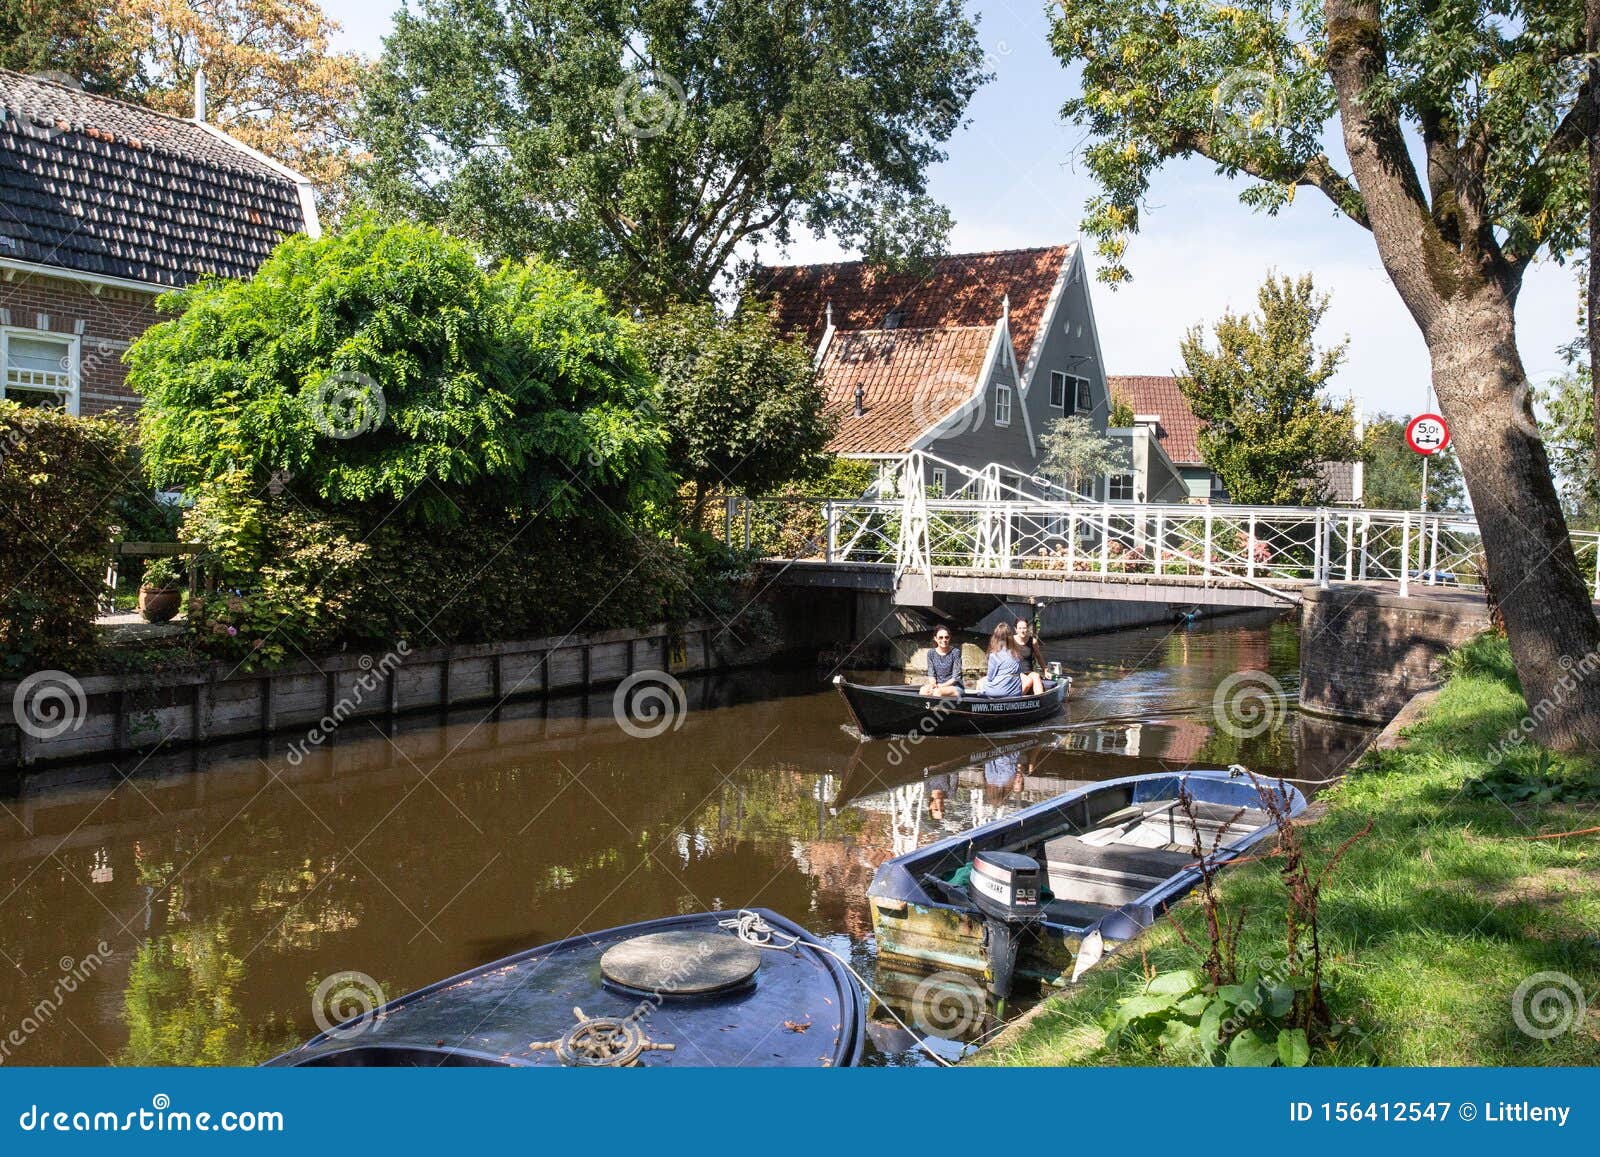 Broek in Waterland Holland Scene Editorial Photography - Image of real,  dutch: 156412547